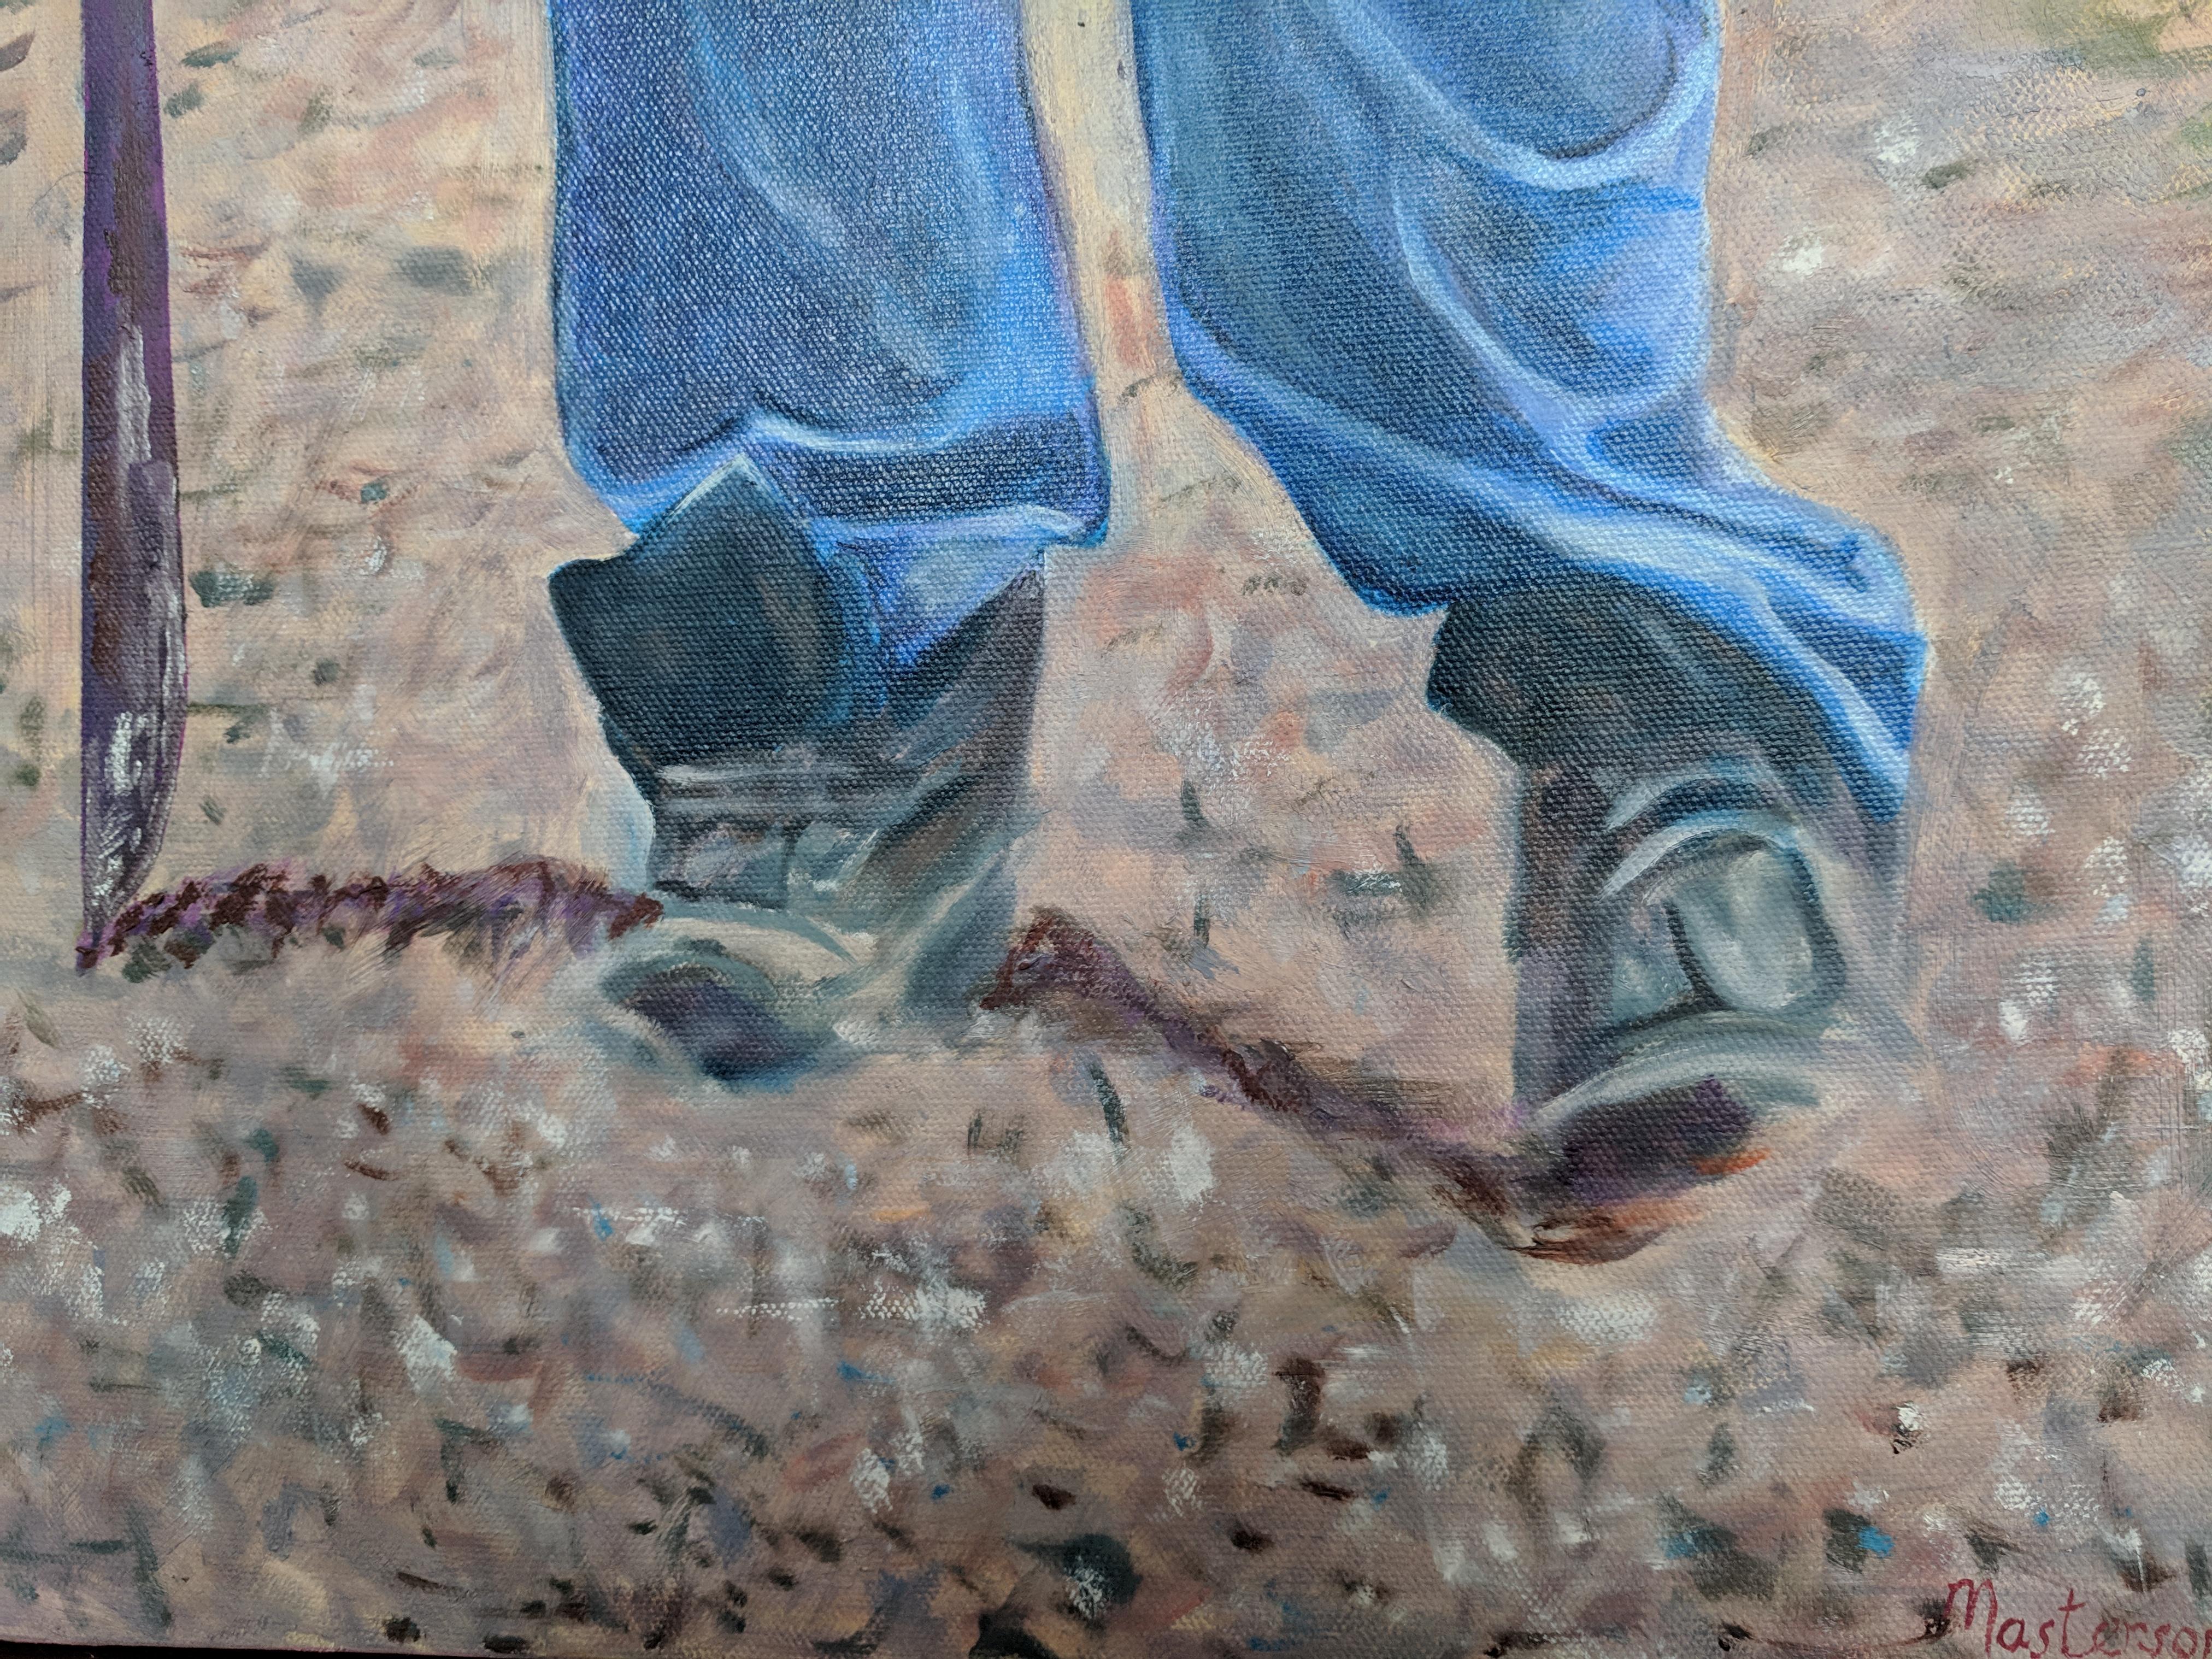 This oil on canvas portrait of a Hudson Valley farm worker shows on his face the demands of the work and his openness to life. The artist treats the blue denim in its many hues as if she were showing the many folds of royal clothing in an eighteenth